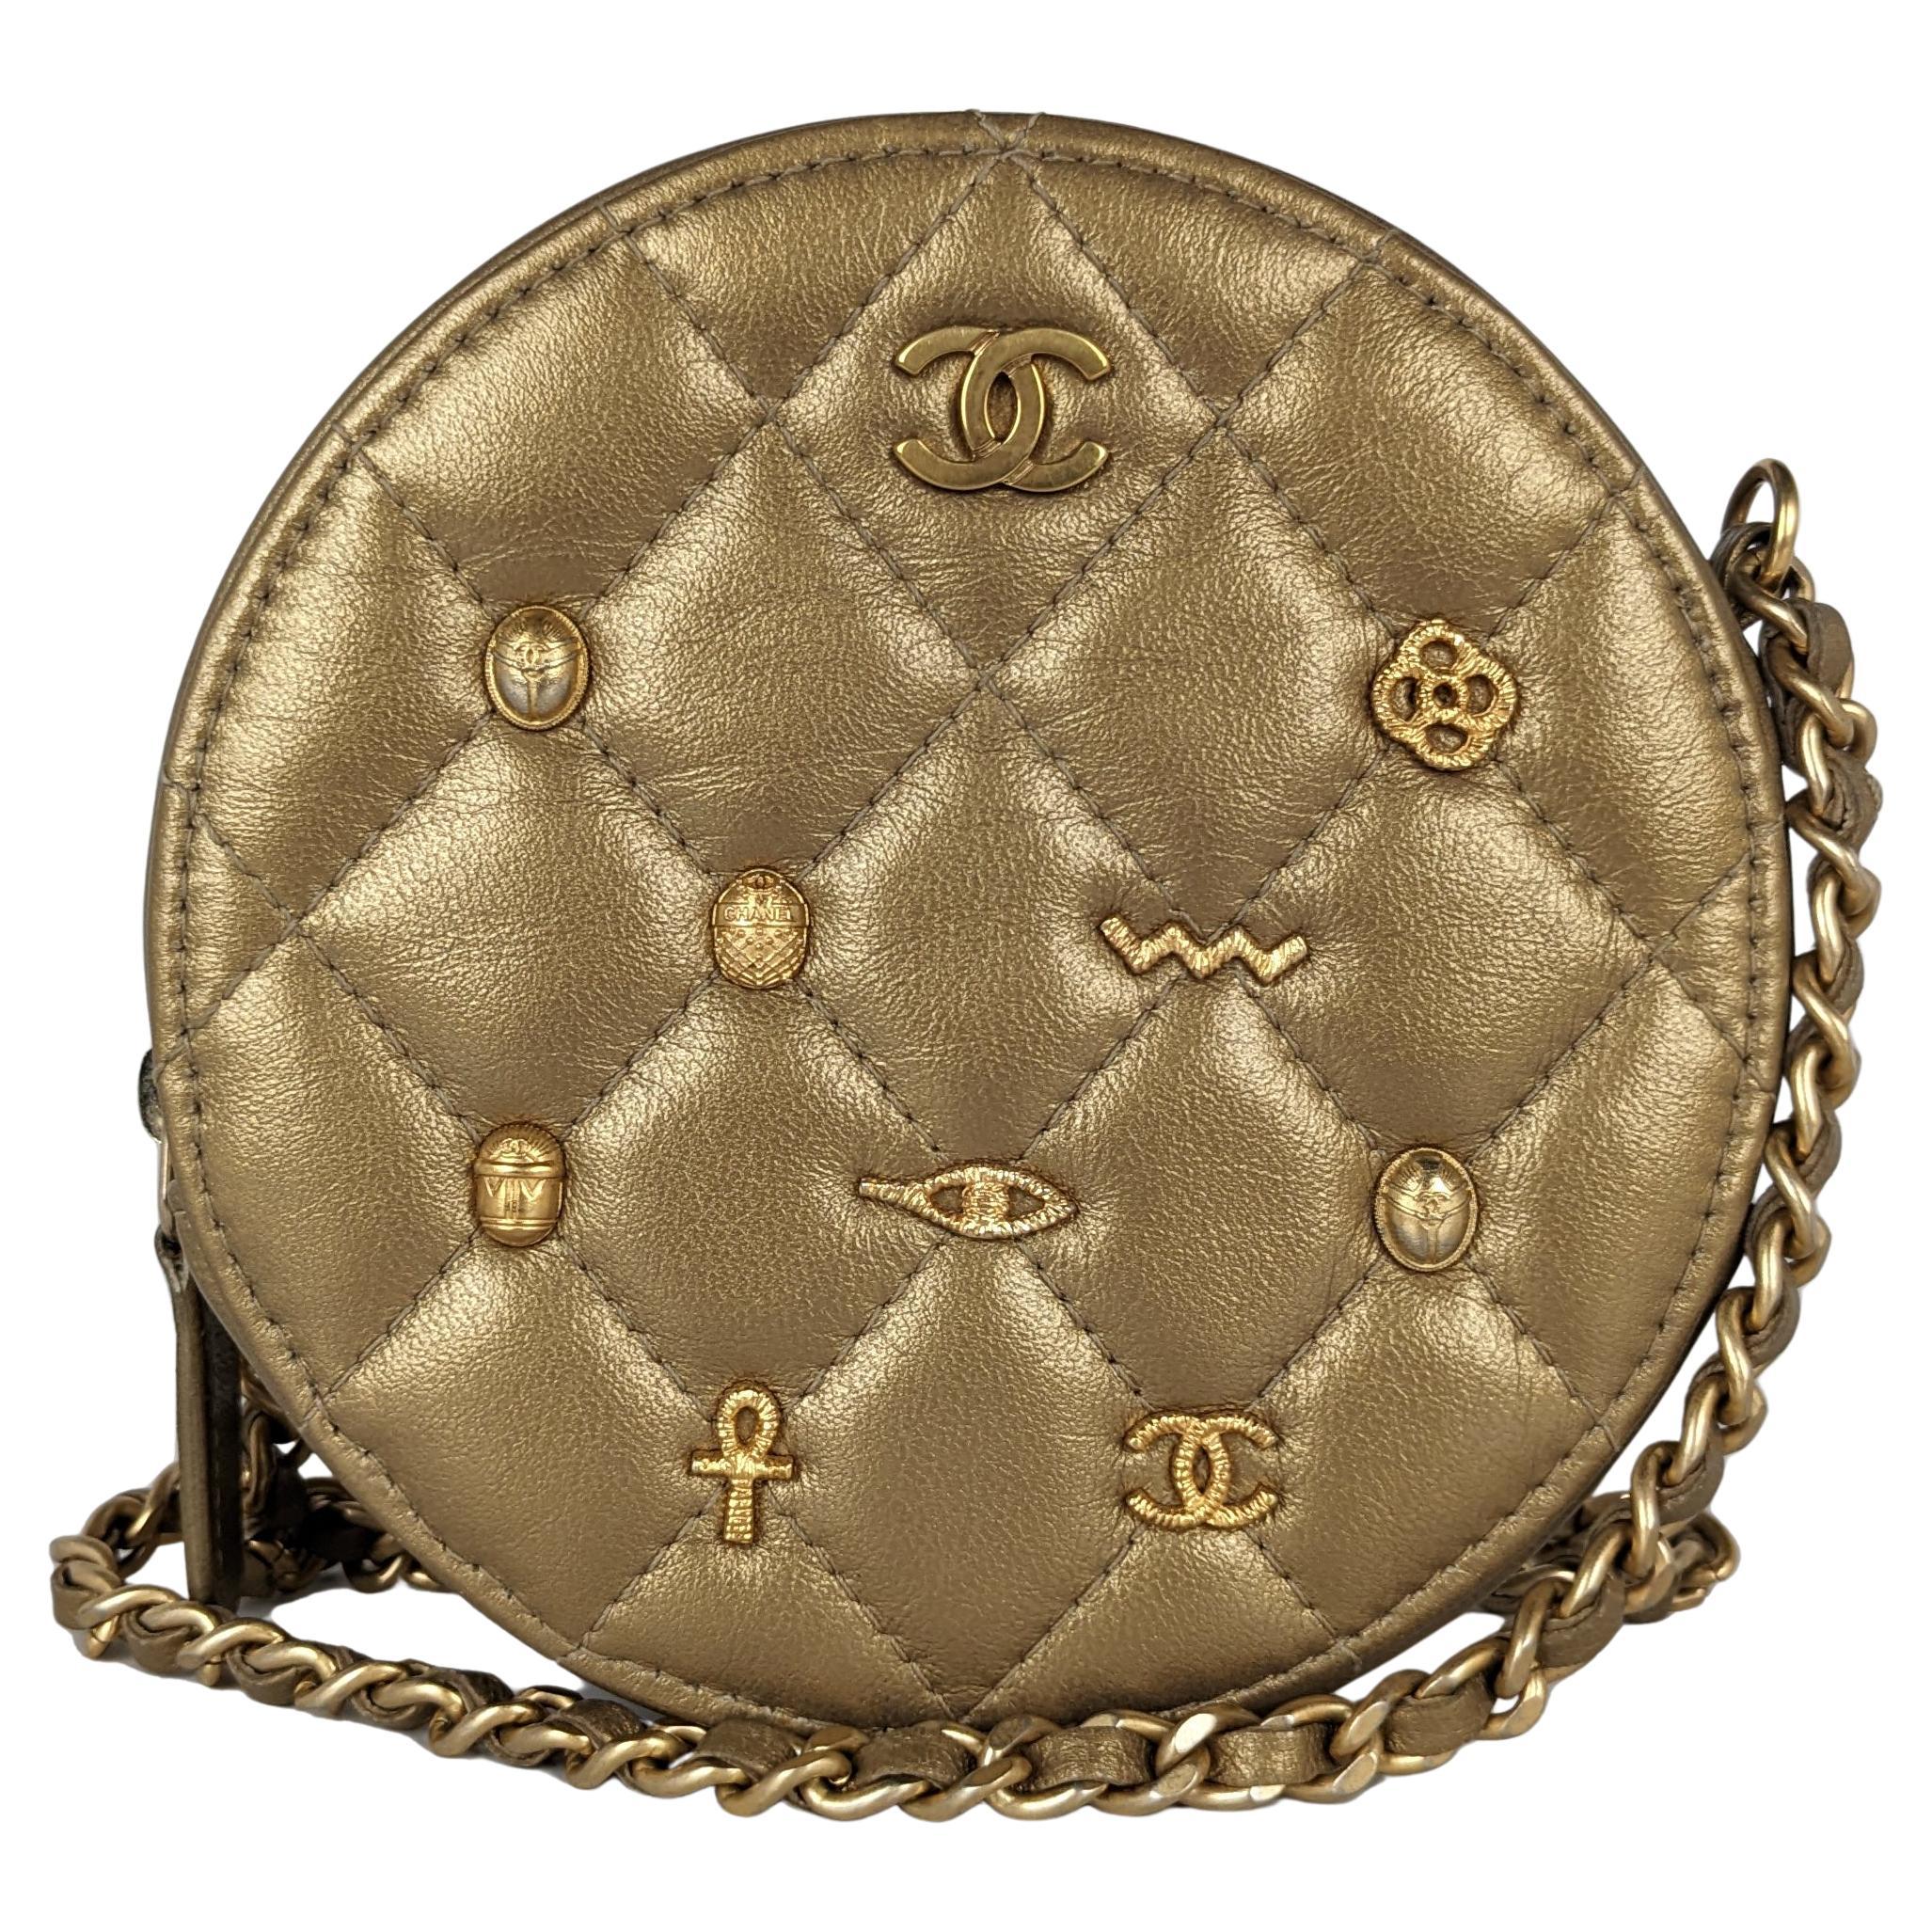 Chanel Metallic Lambskin Quilted Egyptian Amulet Round Clutch With Chain Gold